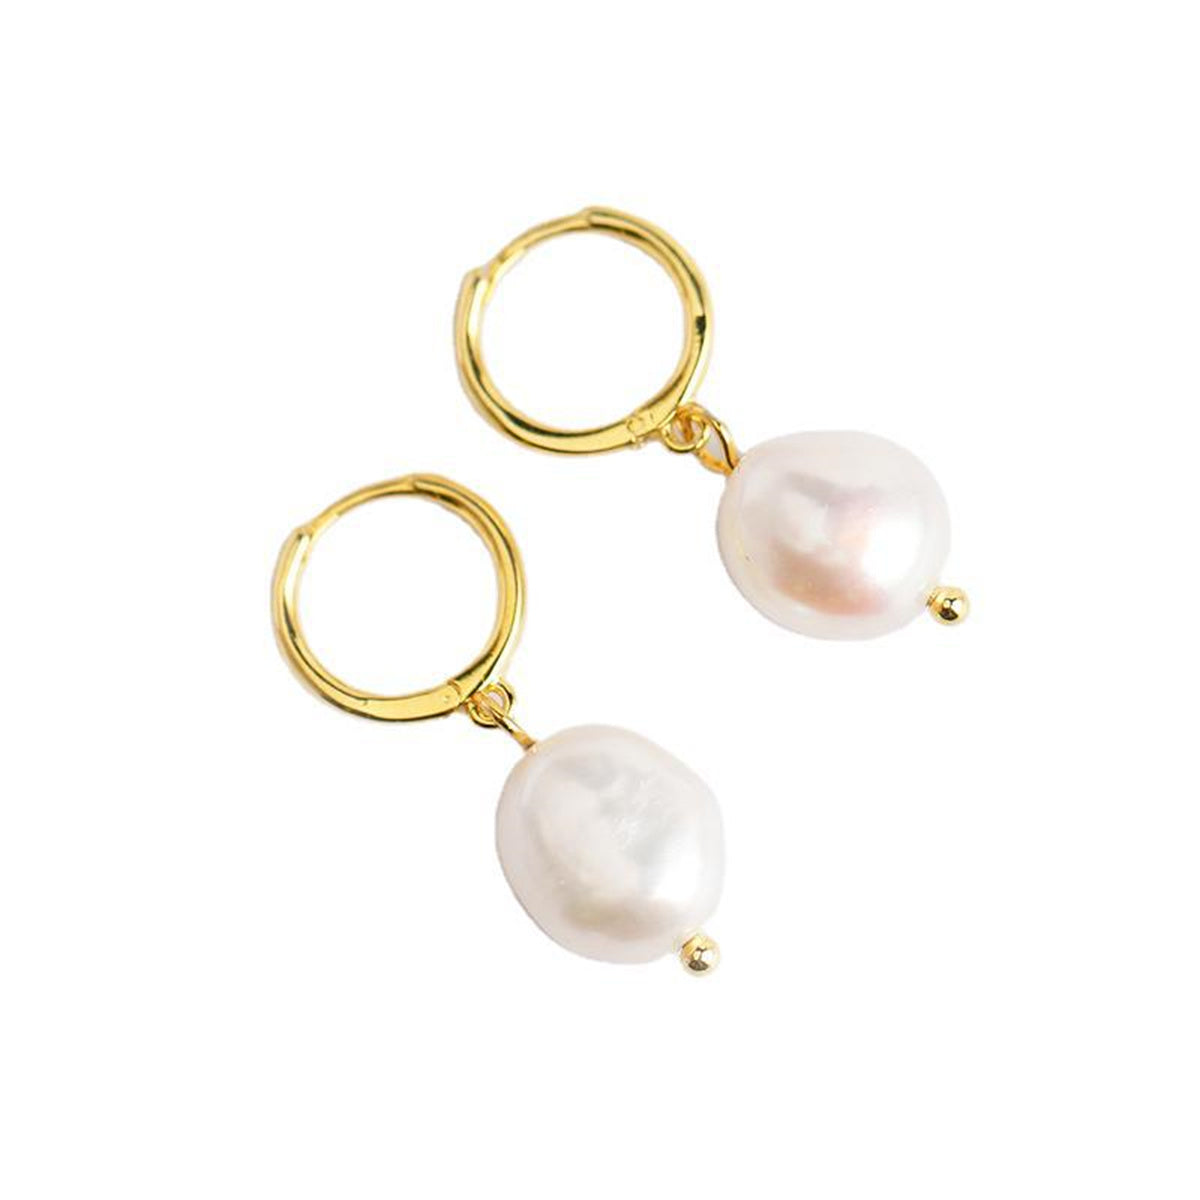 Splendid Pearls Hoop Earrings with Quality White Baroque Freshwater Cultured Pearls 8-12mm for Women